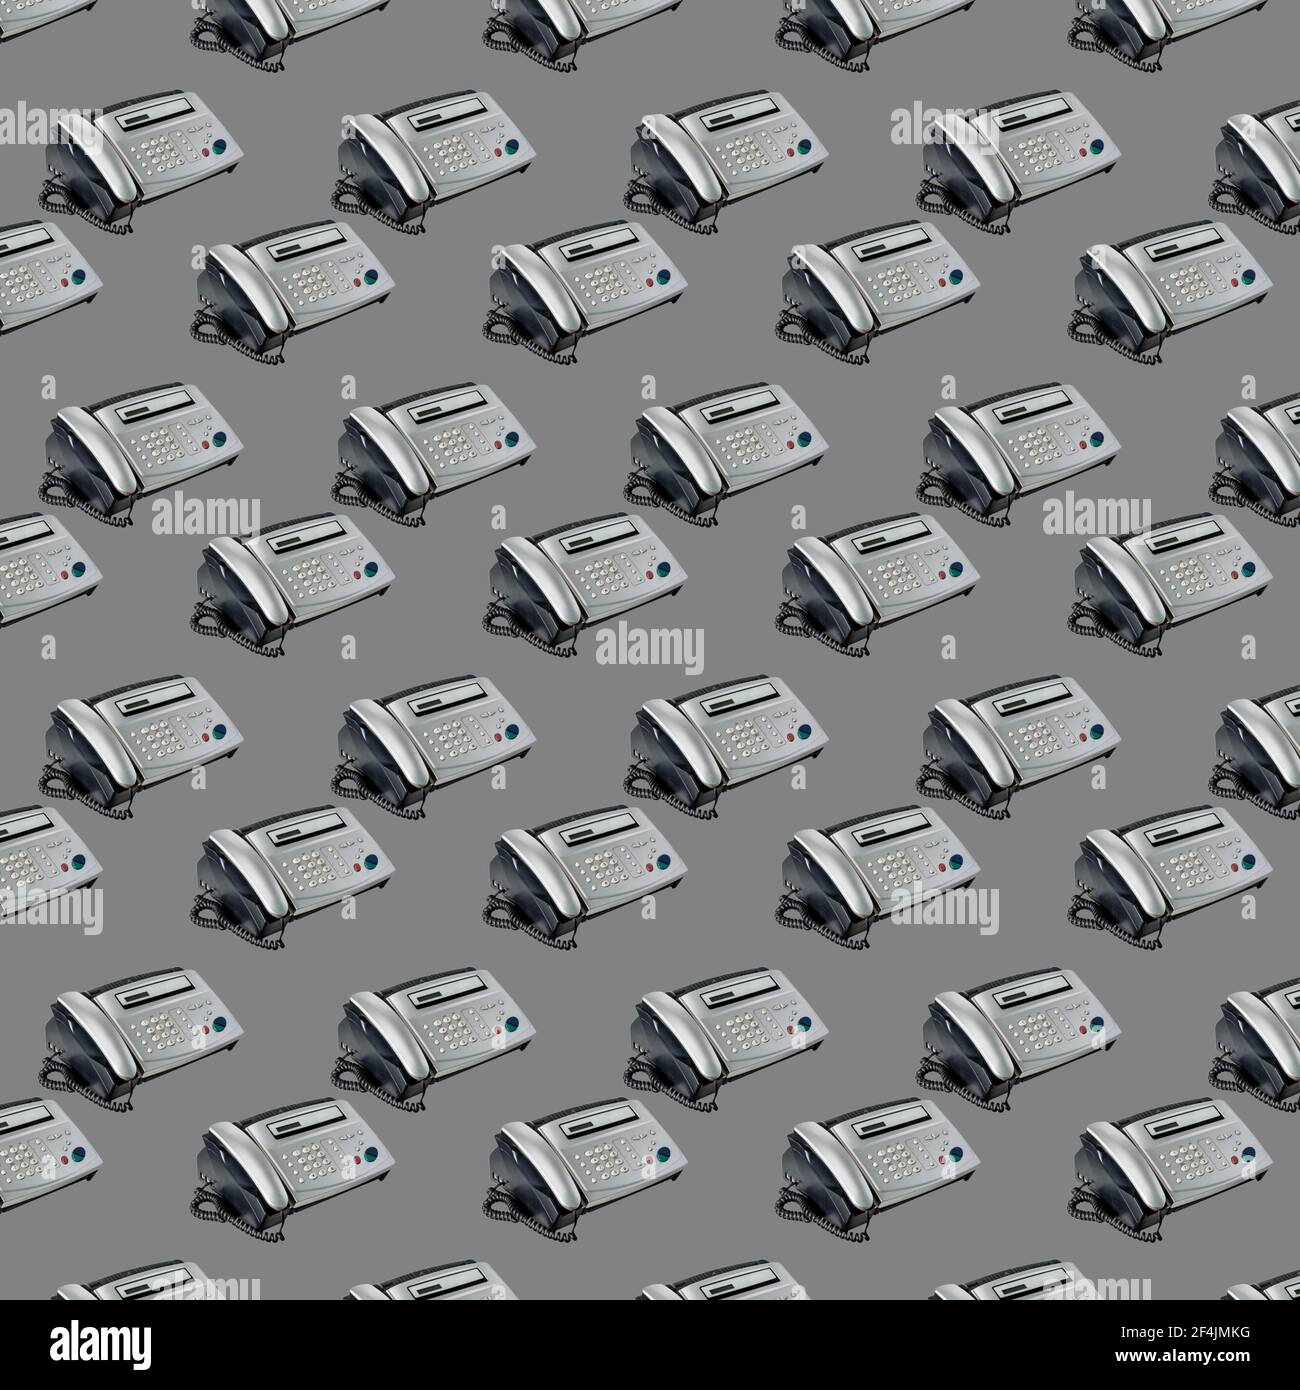 Old office fax machine shot on gray background. seamless pattern with Fax. office equipment, Telephone and fax Stock Photo